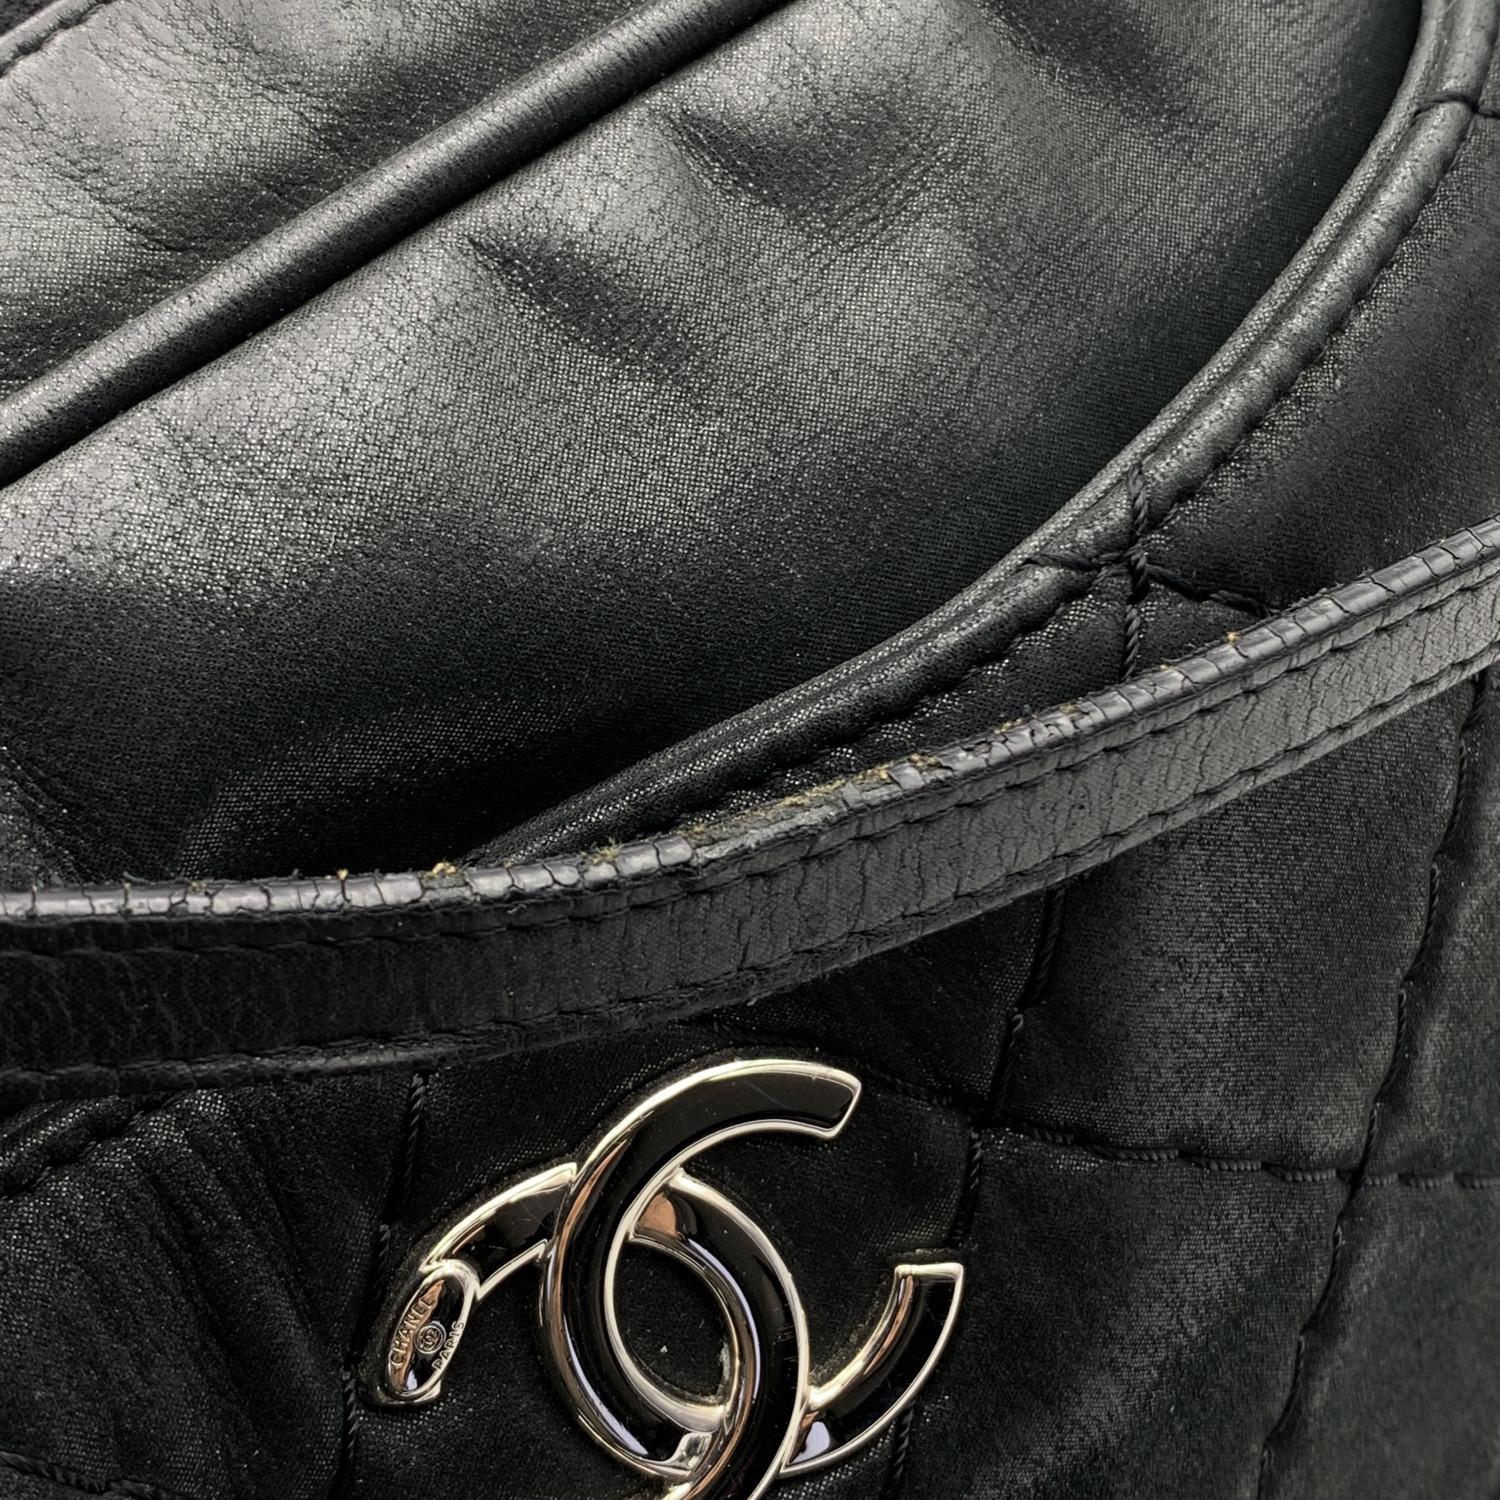 Chanel Relax CC Tote Camera Shoulder Bag crafted in black quilted shimmery leather. Silver metal CC -. Chanel logo. Upper zipper closure. Front and rear pockets with magnetic button closure. Double leather handles and removable interwoven leather